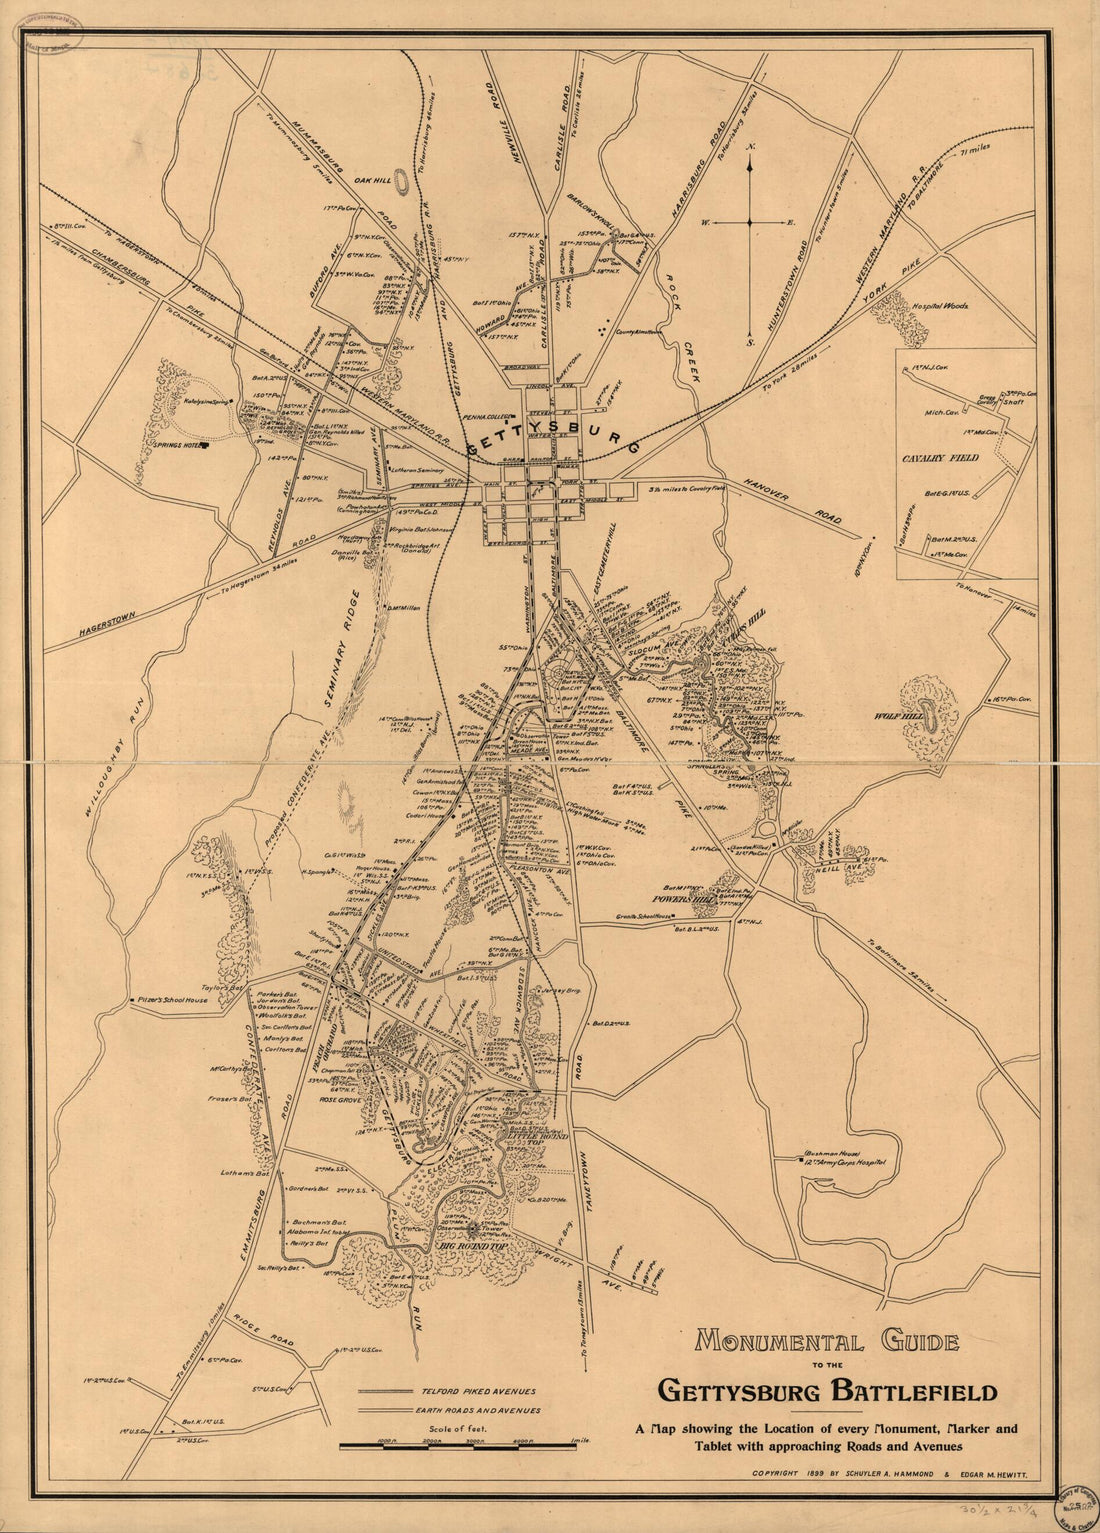 This old map of Monumental Guide to the Gettysburg Battlefield. a Map Showing the Location of Every Monument, Marker and Tablet With Approaching Roads and Avenues from 1899 was created by Schuyler A. Hammond, Edgar M. Hewitt in 1899